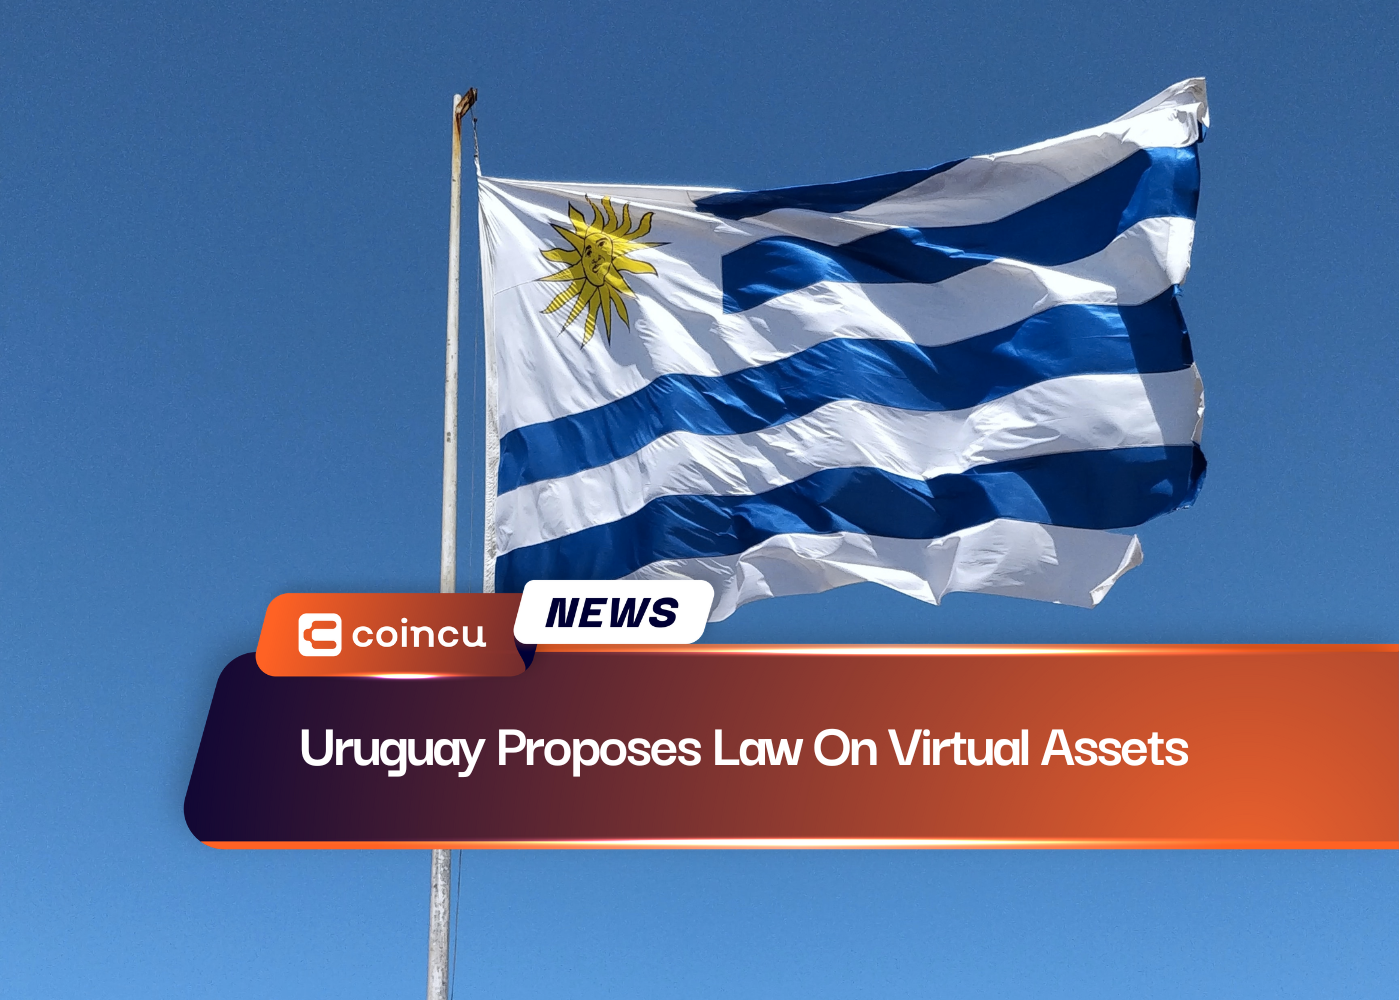 Uruguay Proposes Law On Virtual Assets